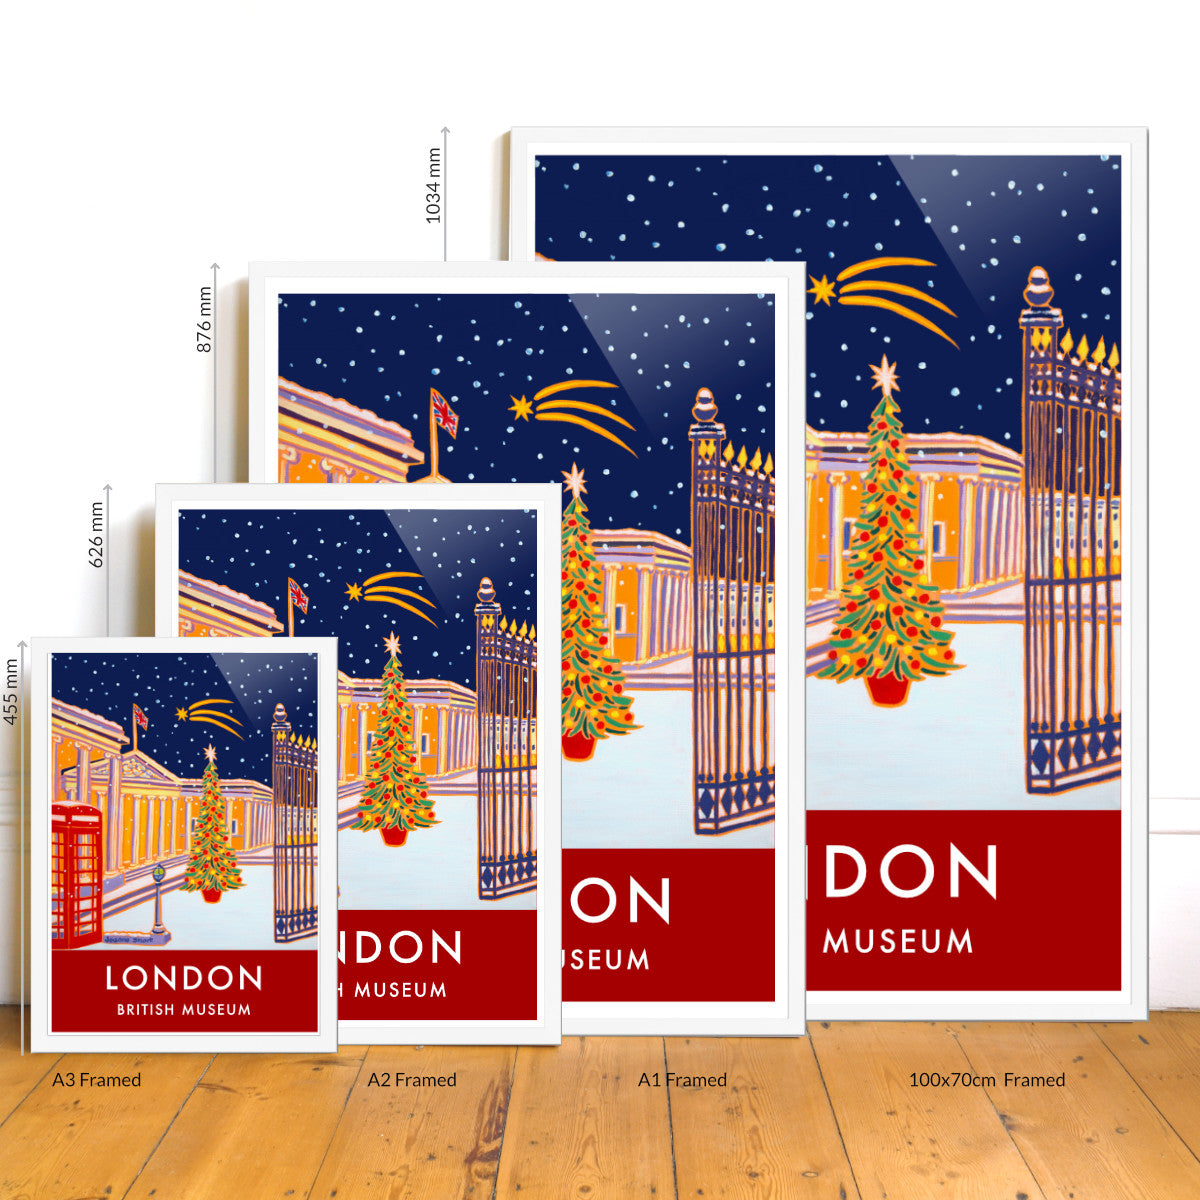 Vintage Style Travel Art Poster Print by Joanne Short of The British Museum, London. Christmas.